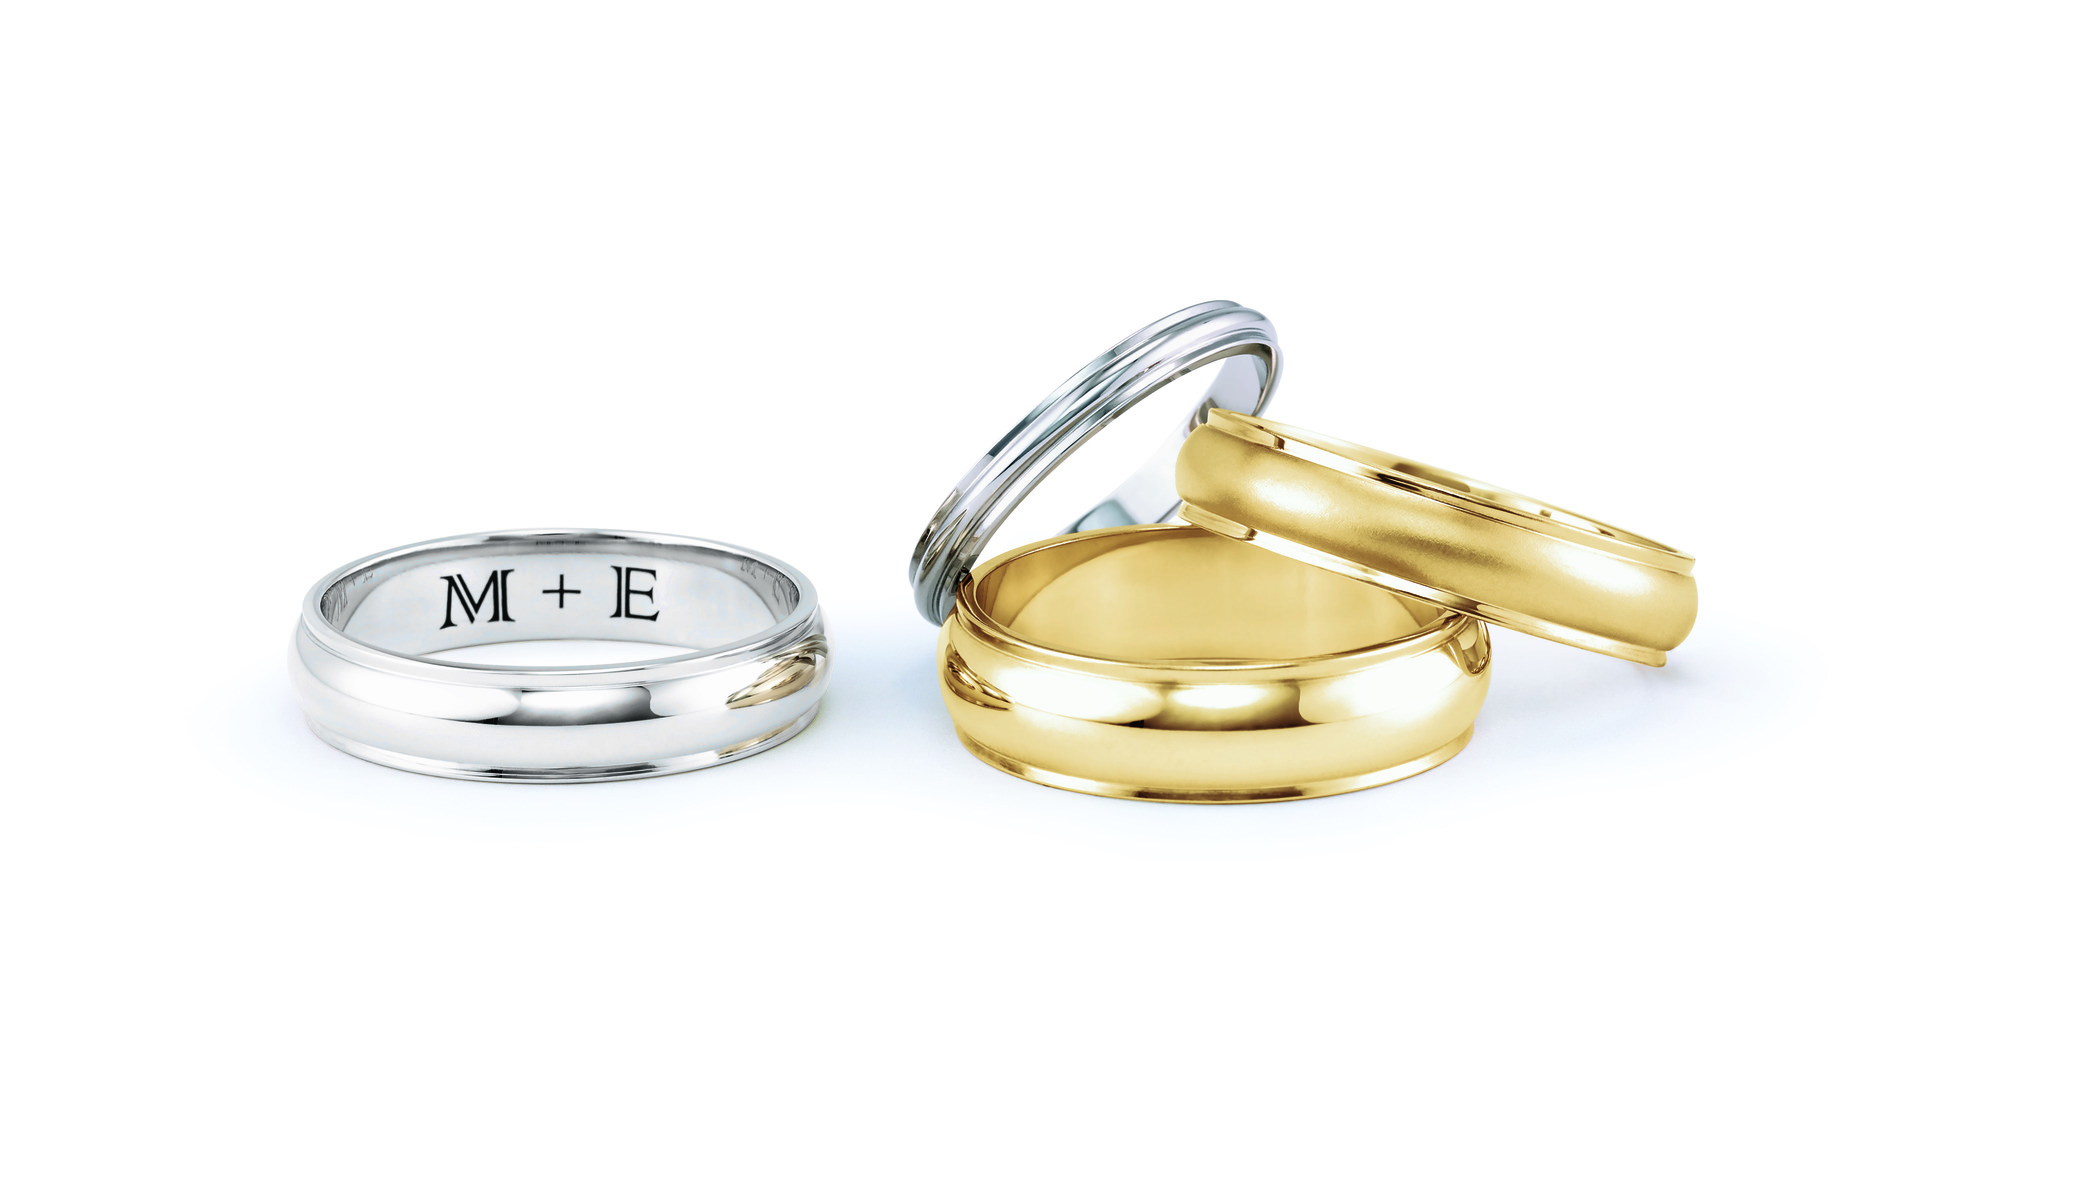 Four wedding bands, 2 gold and 2 platinum. One shows an engraved sentence: M+E